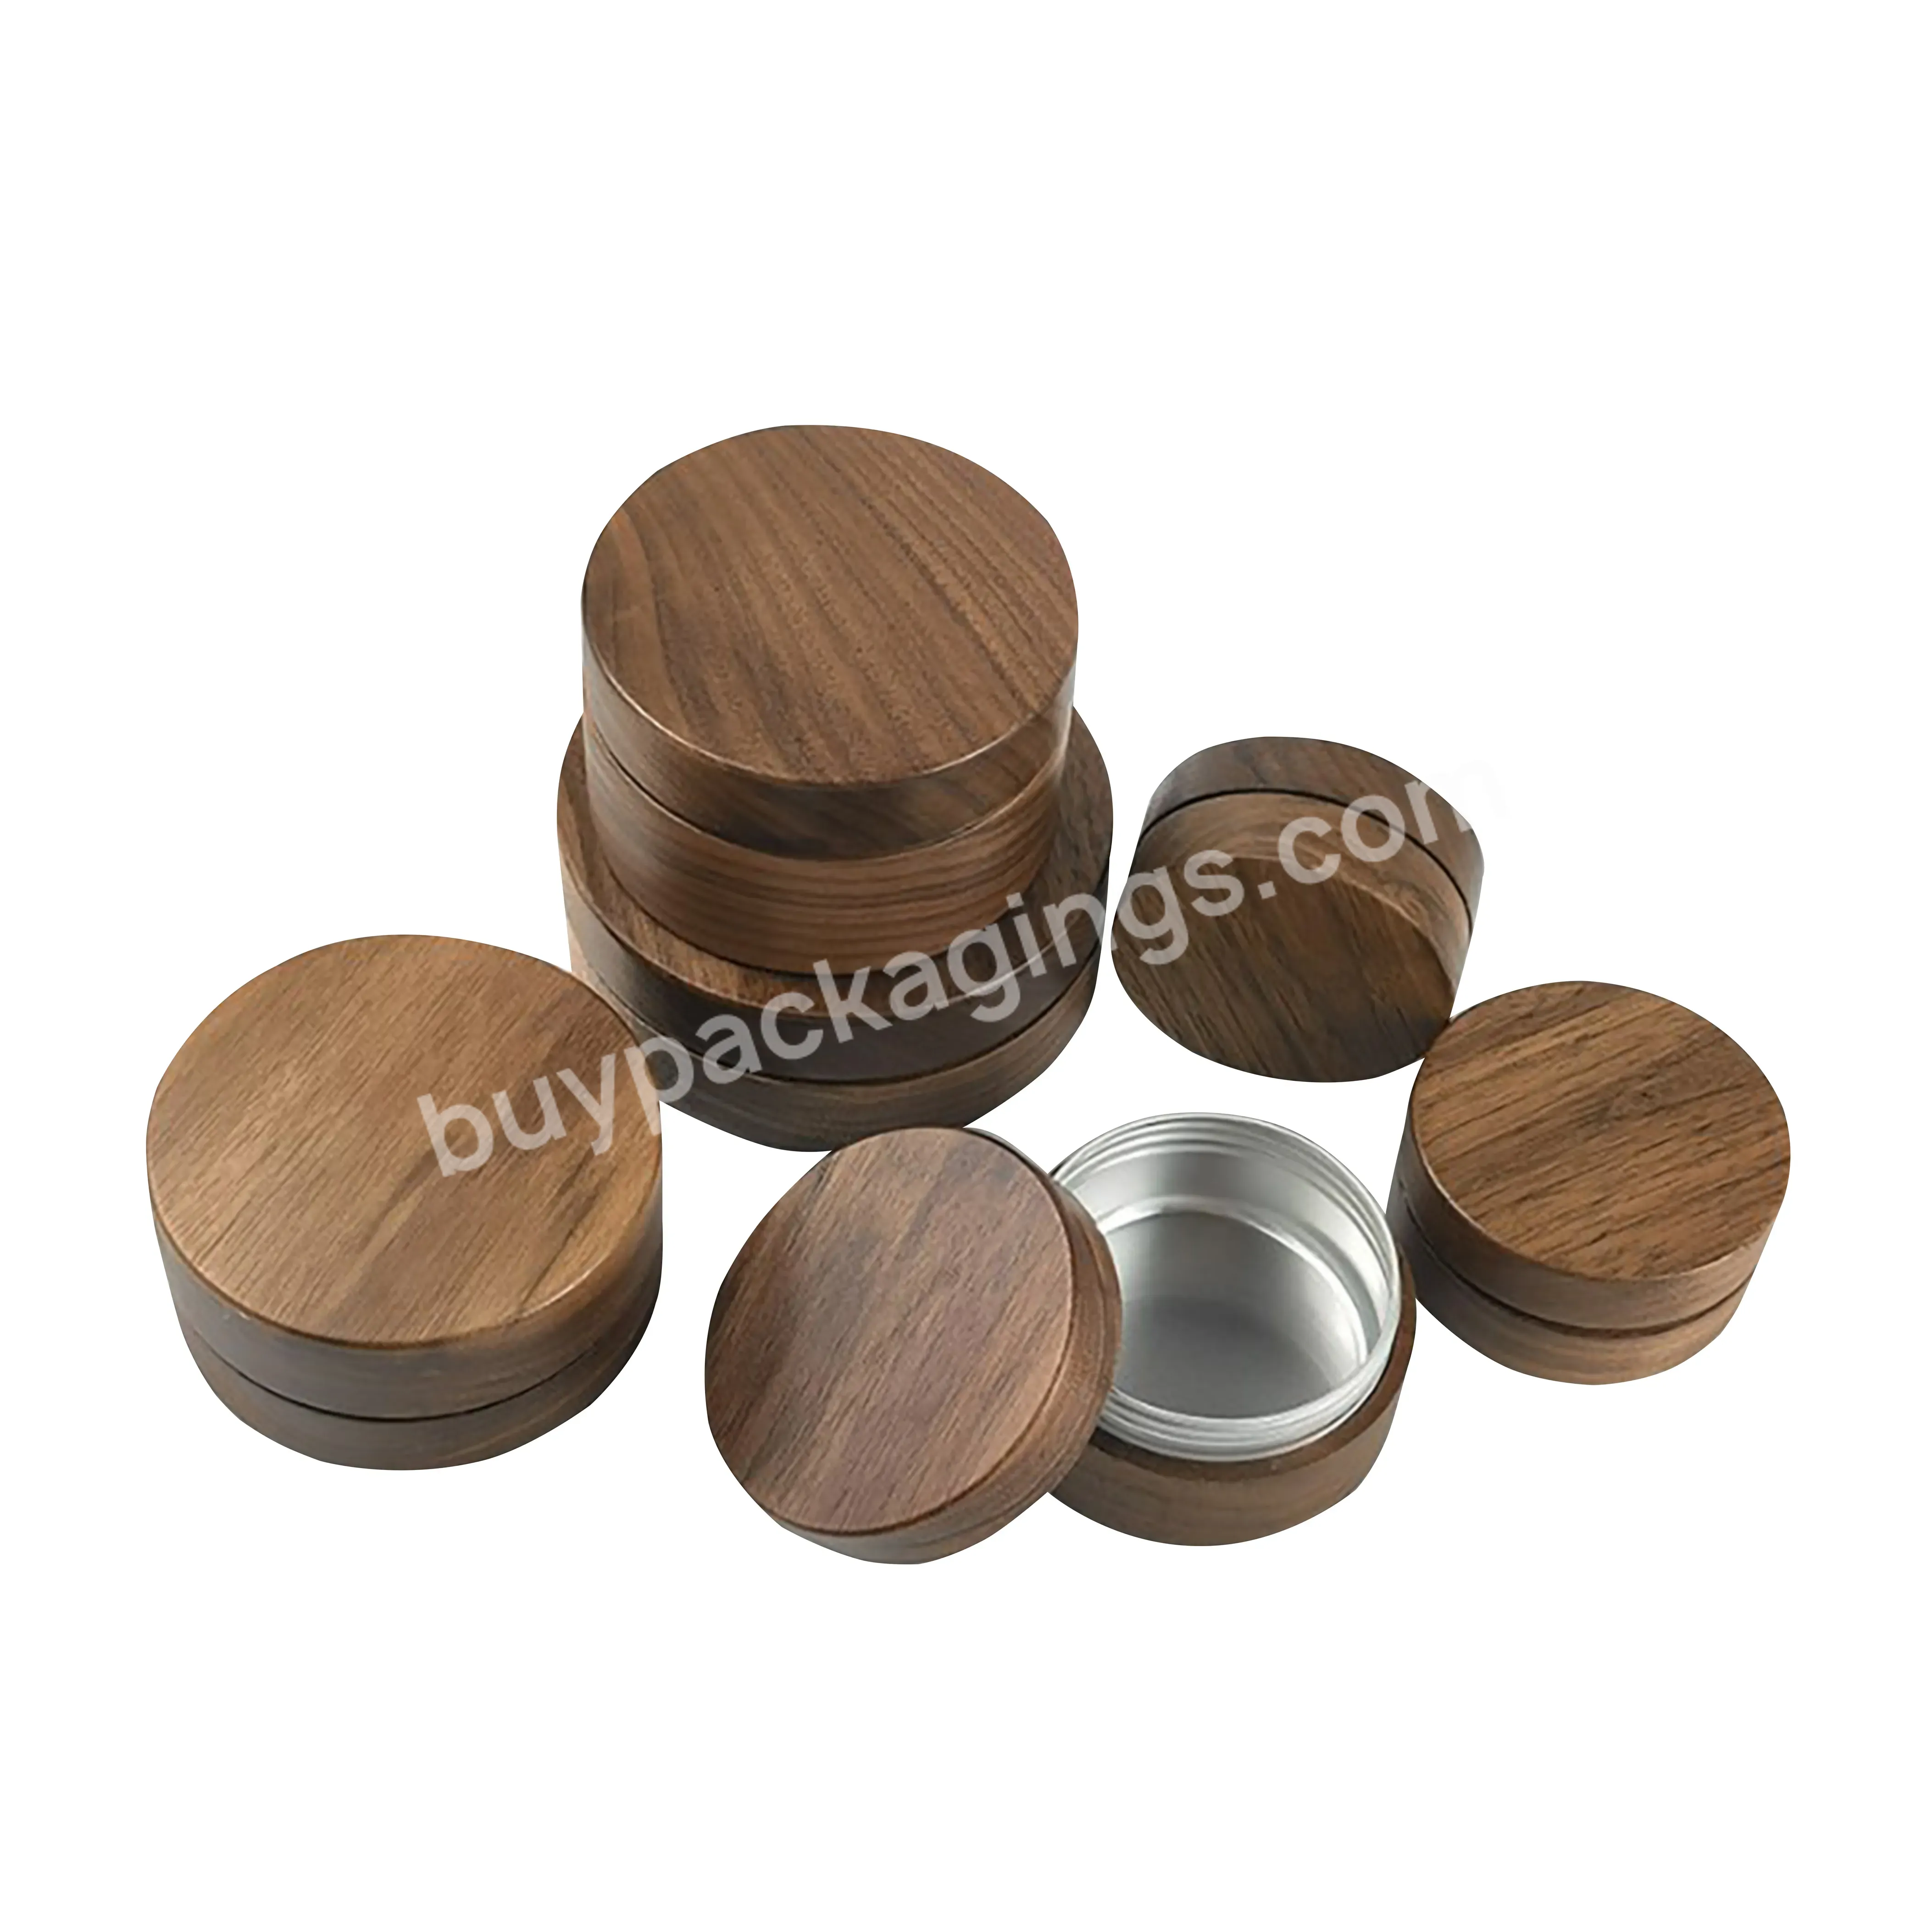 10g-100g Wholesale Round Bamboo Wood Cream Jar Portable Aluminum Essential Oil Bamboo Jar For Mask With Bamboo Lid - Buy 10g-100g Wholesale Round Bamboo Wood Cream Jar,Portable Aluminum Essential Oil Bamboo Jar,Jar For Mask With Bamboo Lid.